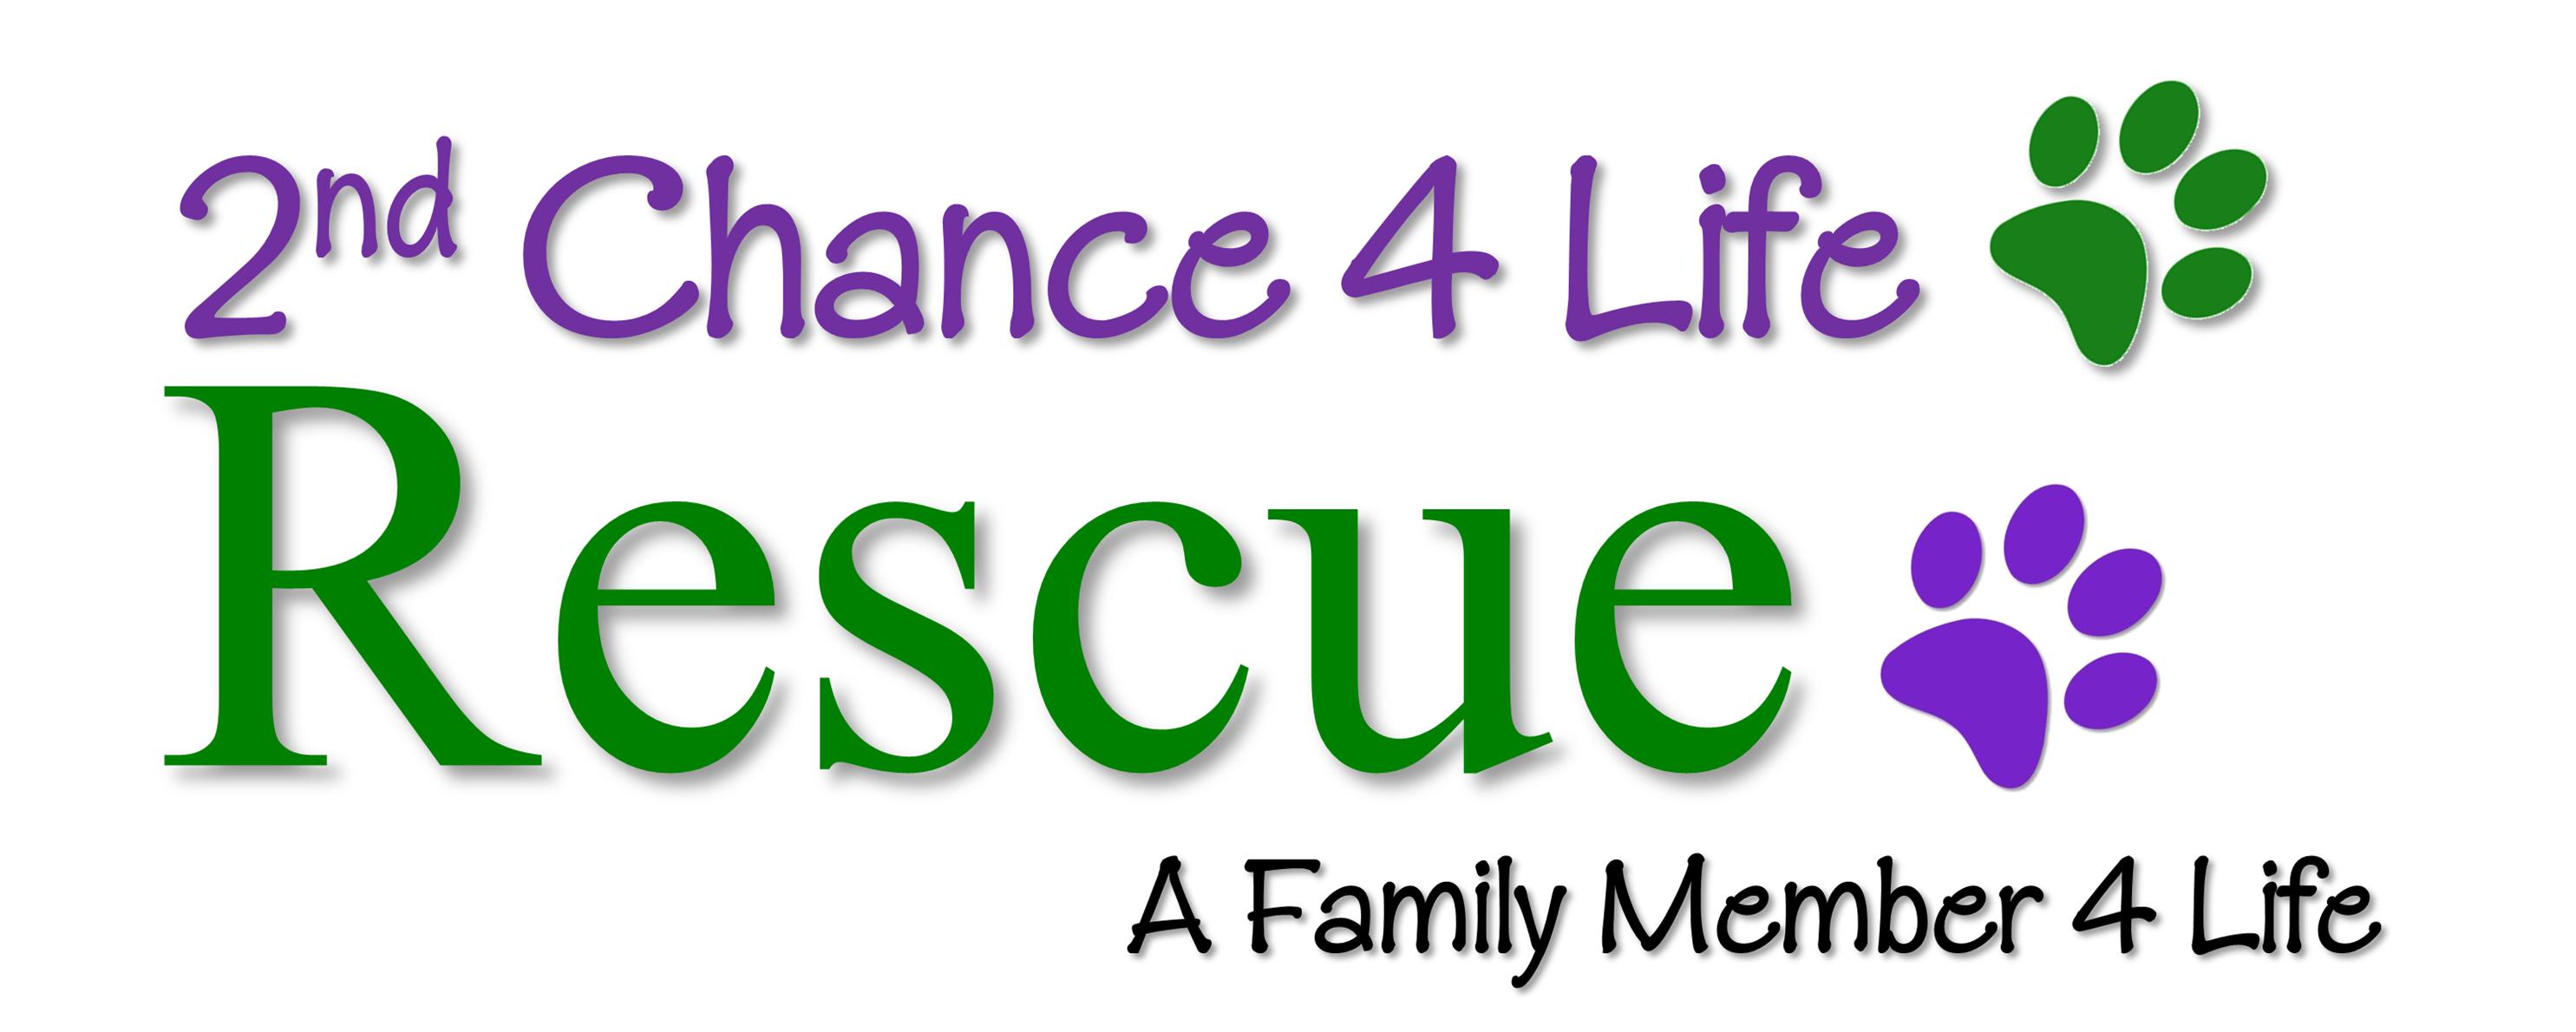 2nd Chance 4 Life Rescue